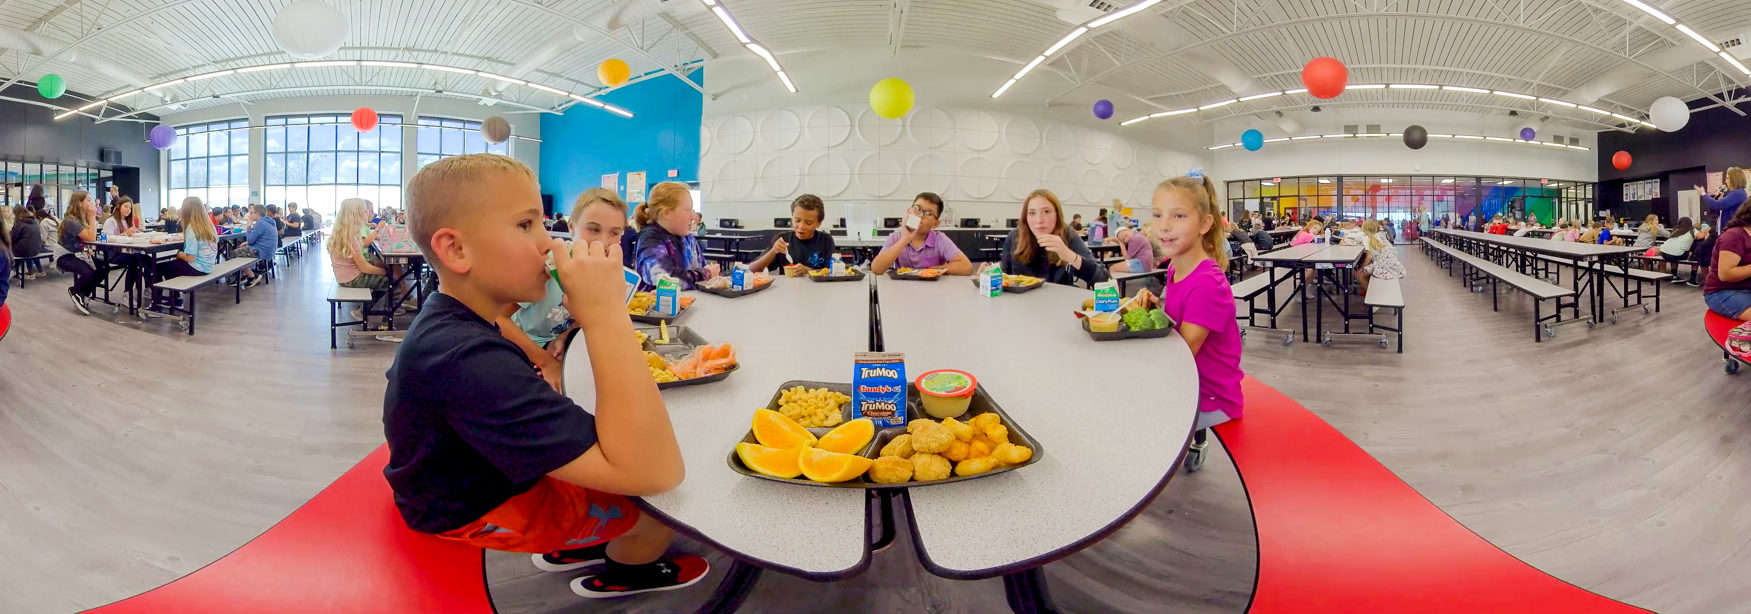 Kids at lunch eating fresh meals 360 video